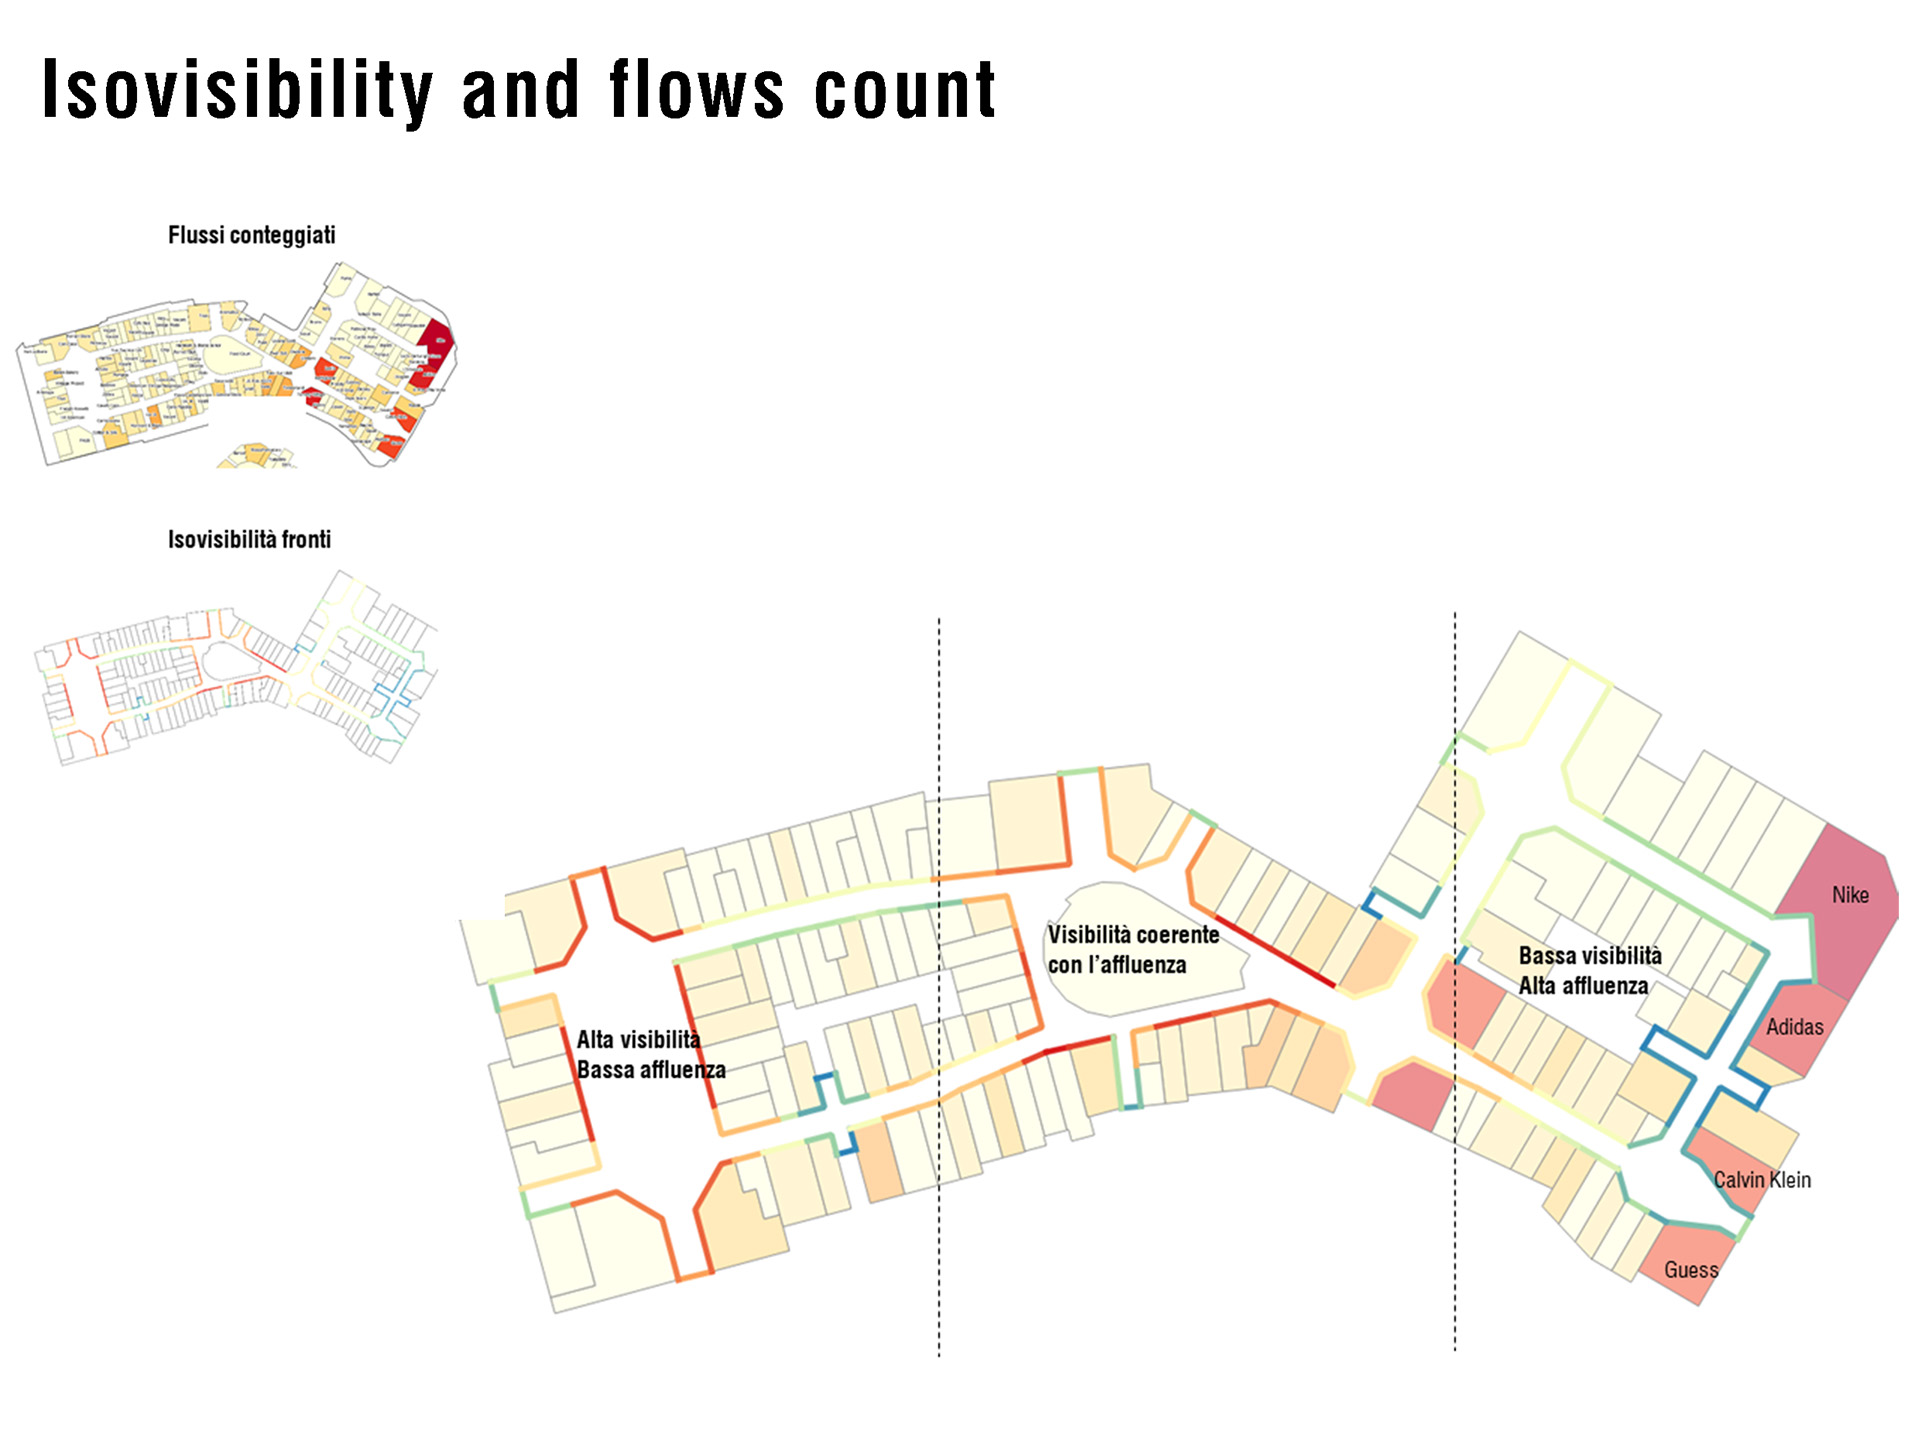 Isovisibility and flows count of the stores